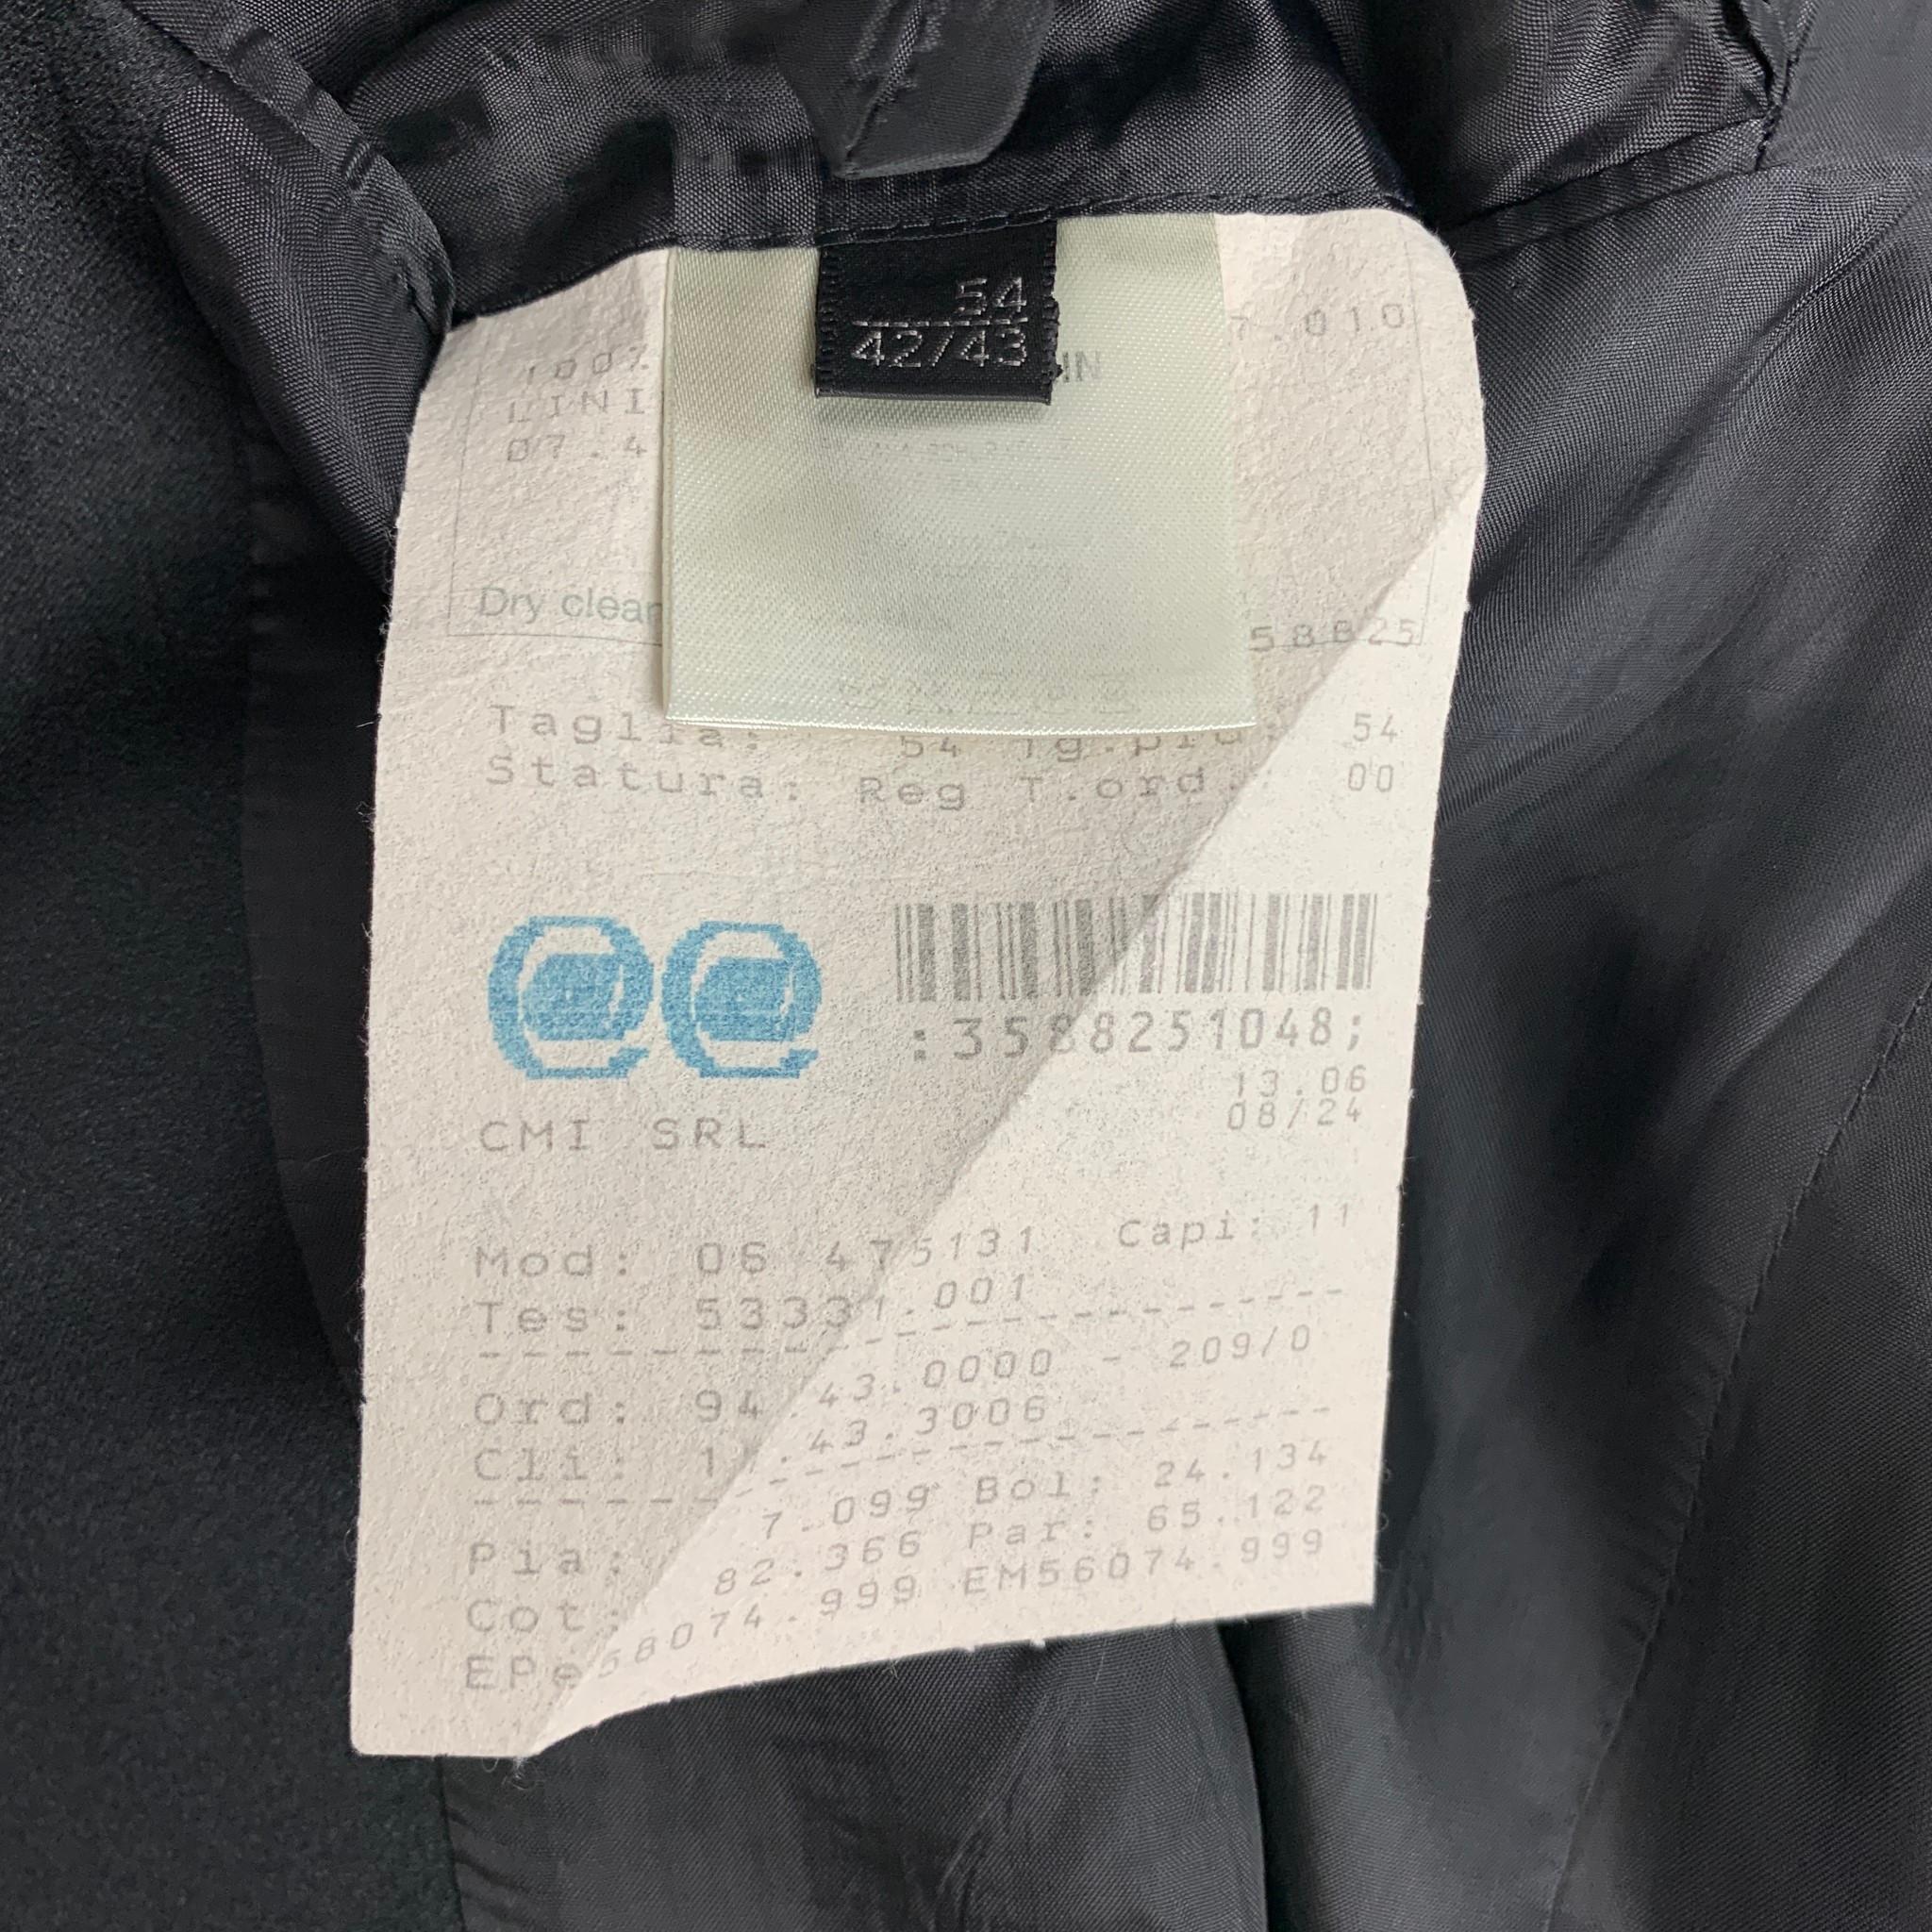 CALVIN KLEIN COLLECTION tuxedo sport coat comes in a black wool with a full liner featuring a notch lapel, flap pockets, and a double button closure.

Very Good Pre-Owned Condition.
Marked: 44/54

Measurements:

Shoulder: 19 in.
Chest: 44